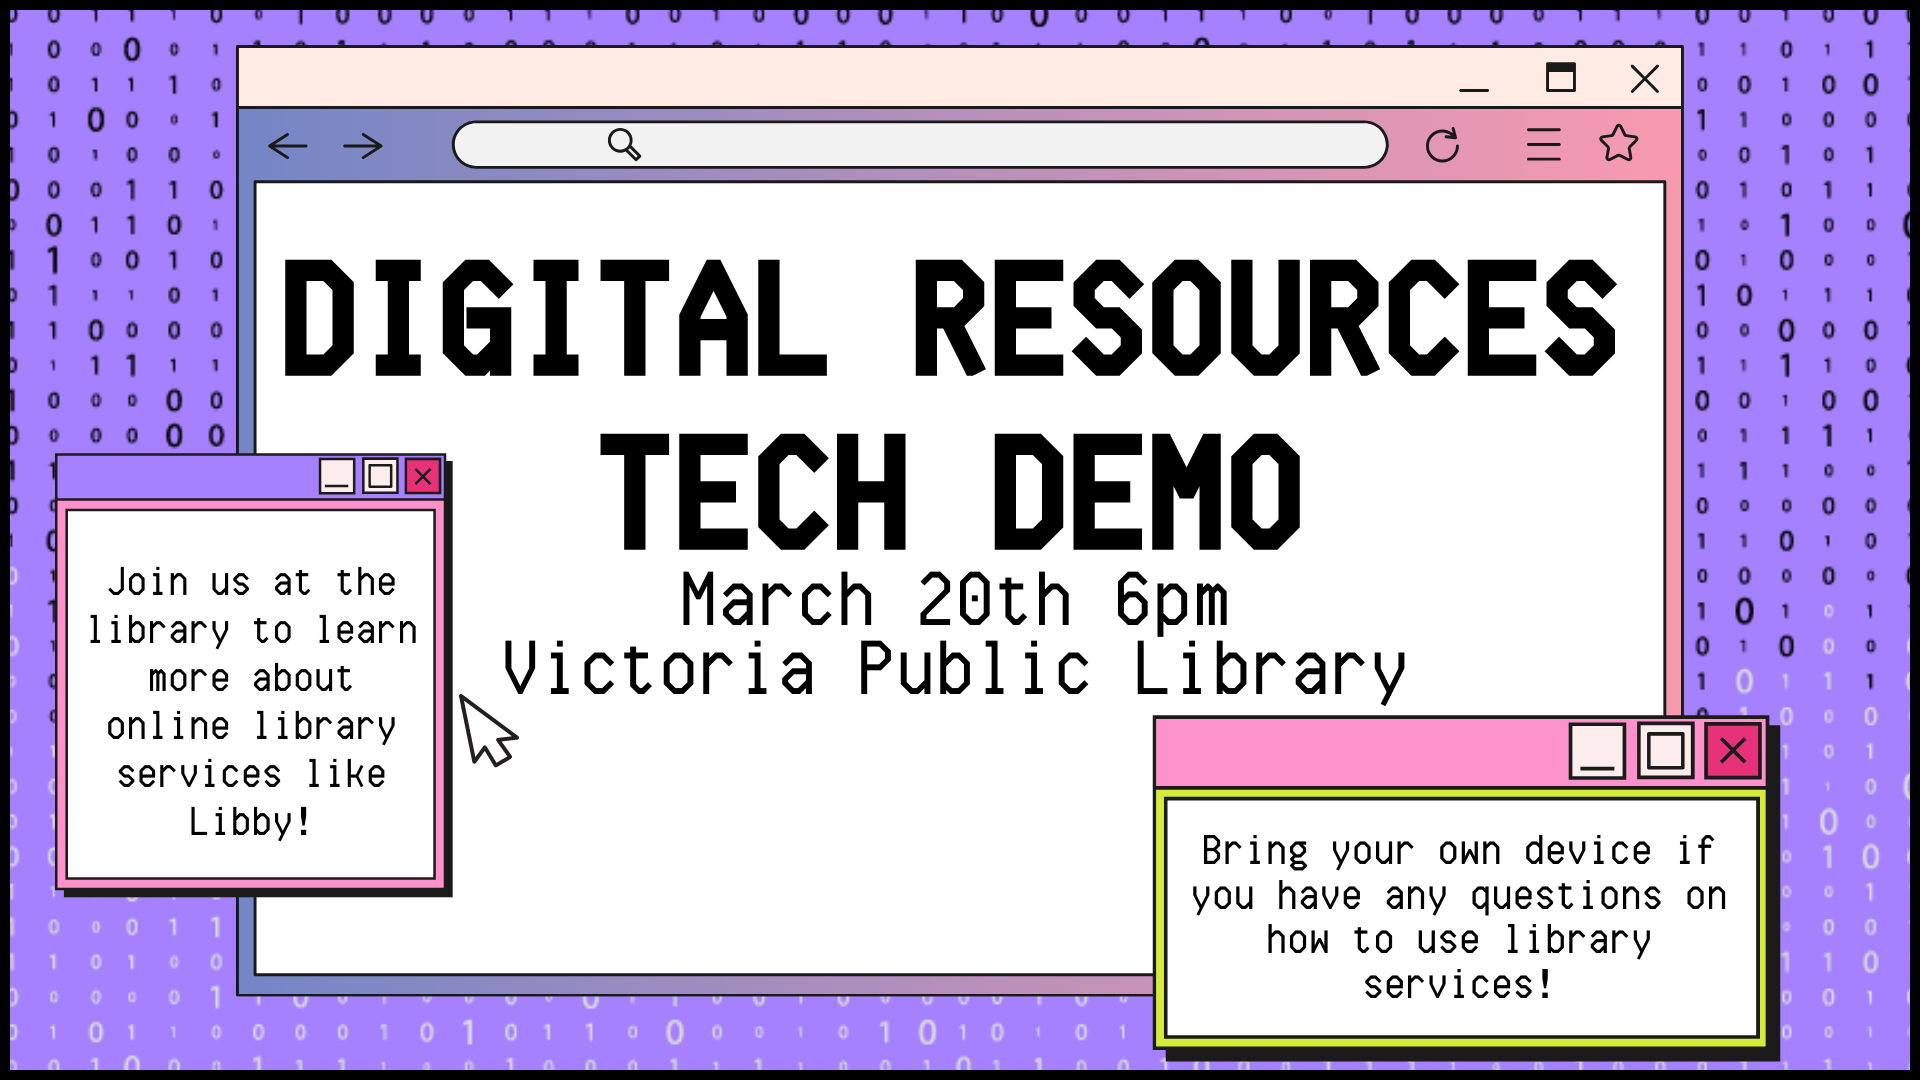 Digital resources tech demo March 20th at 6pm